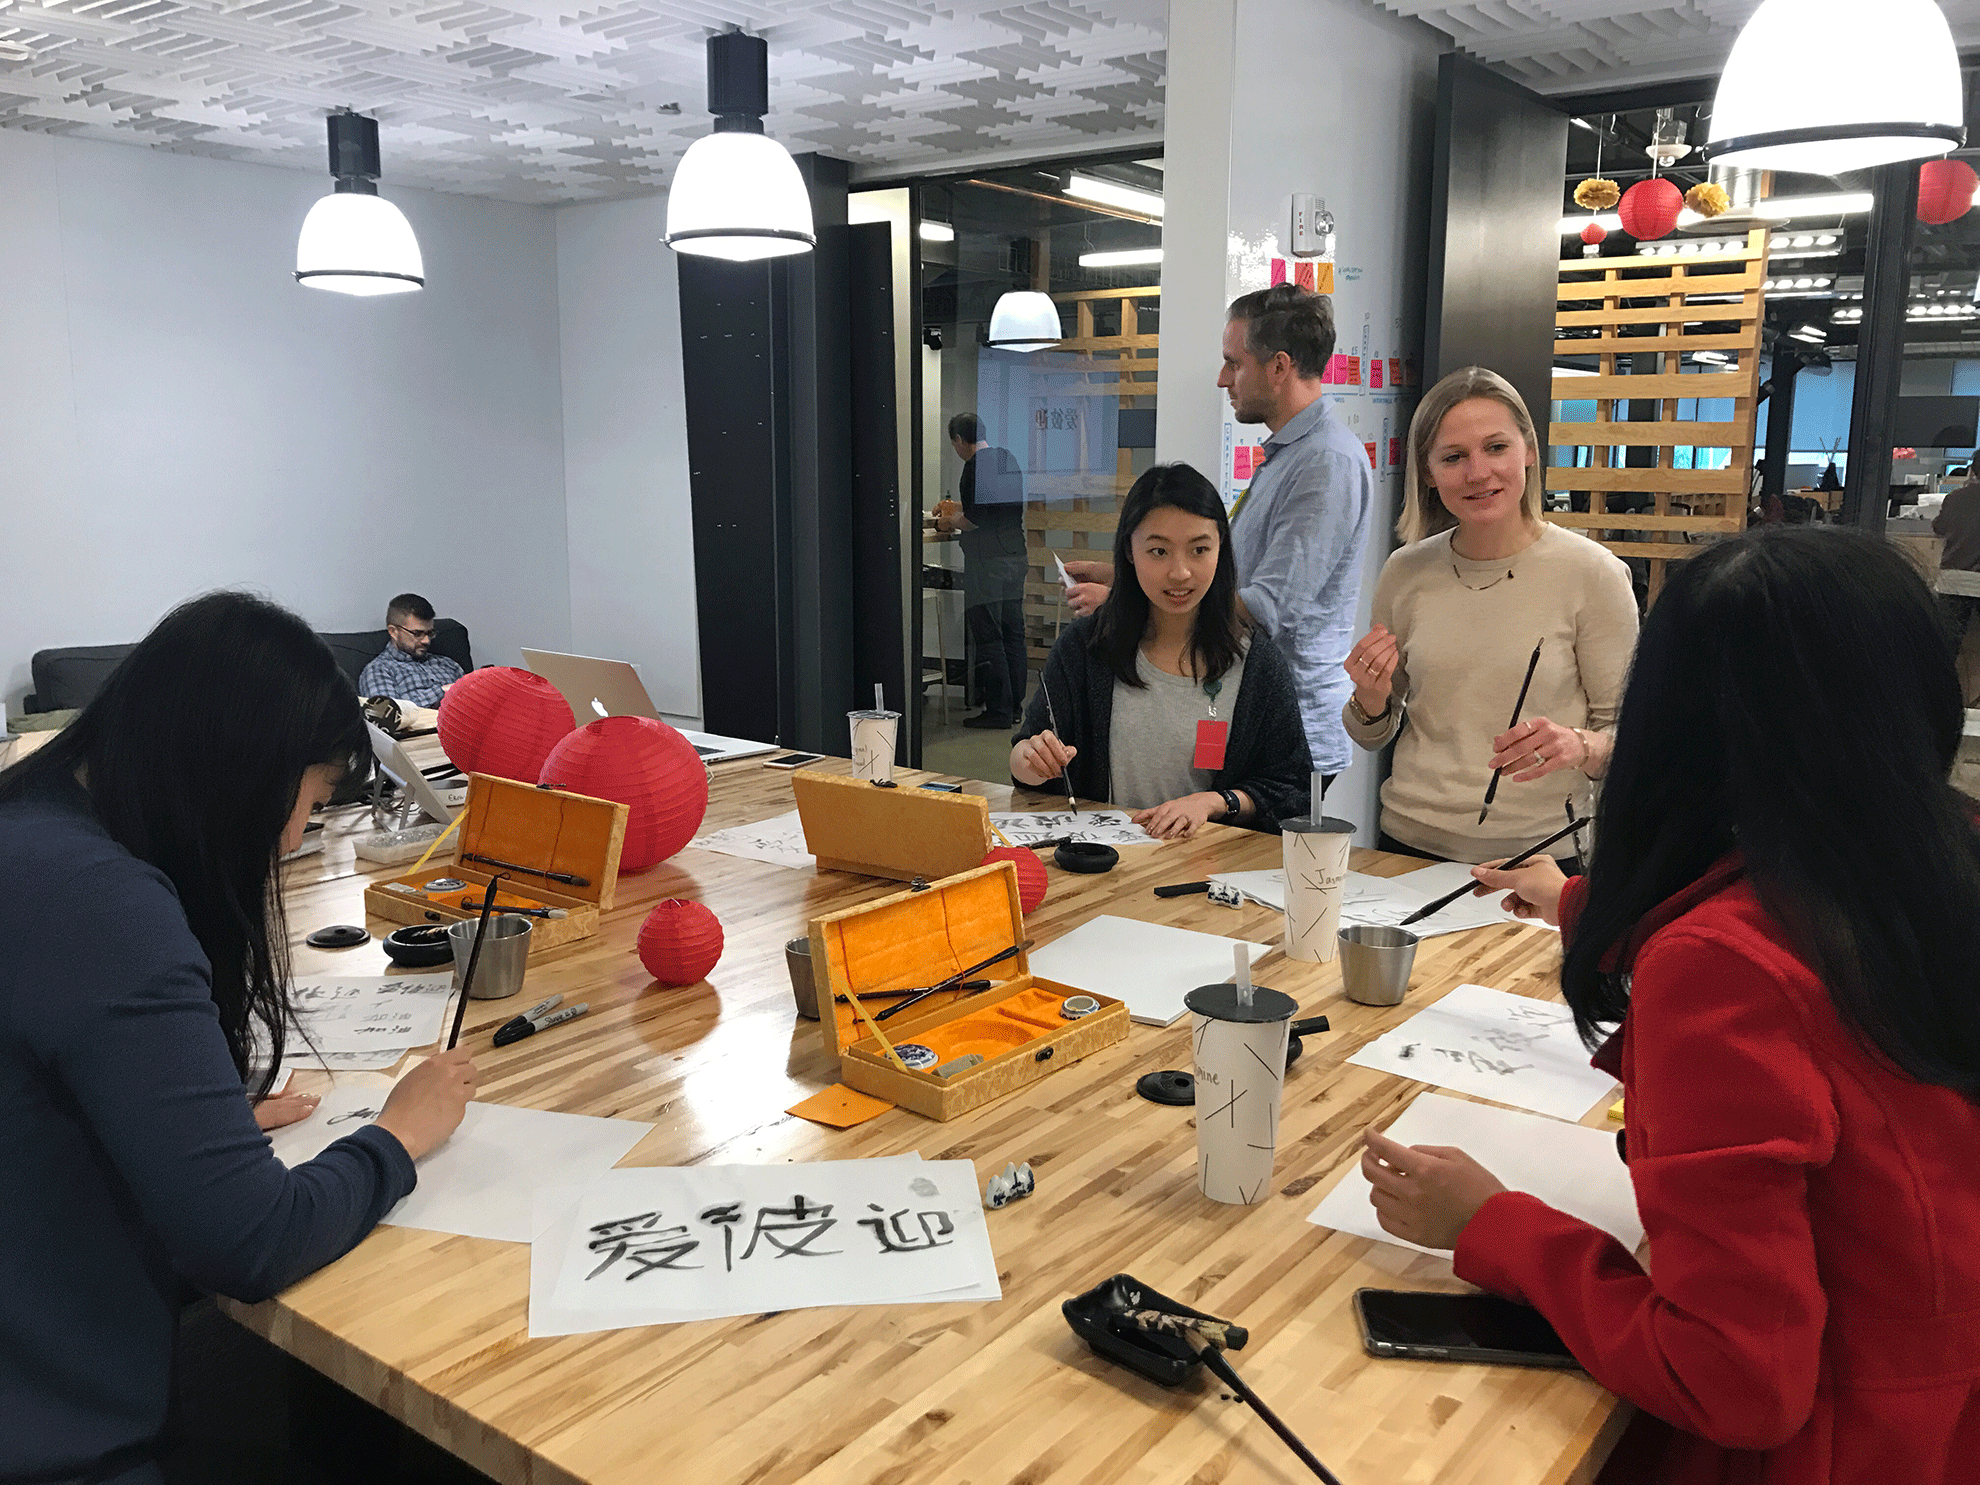 A group of people sit around a table making Chinese calligraphy.